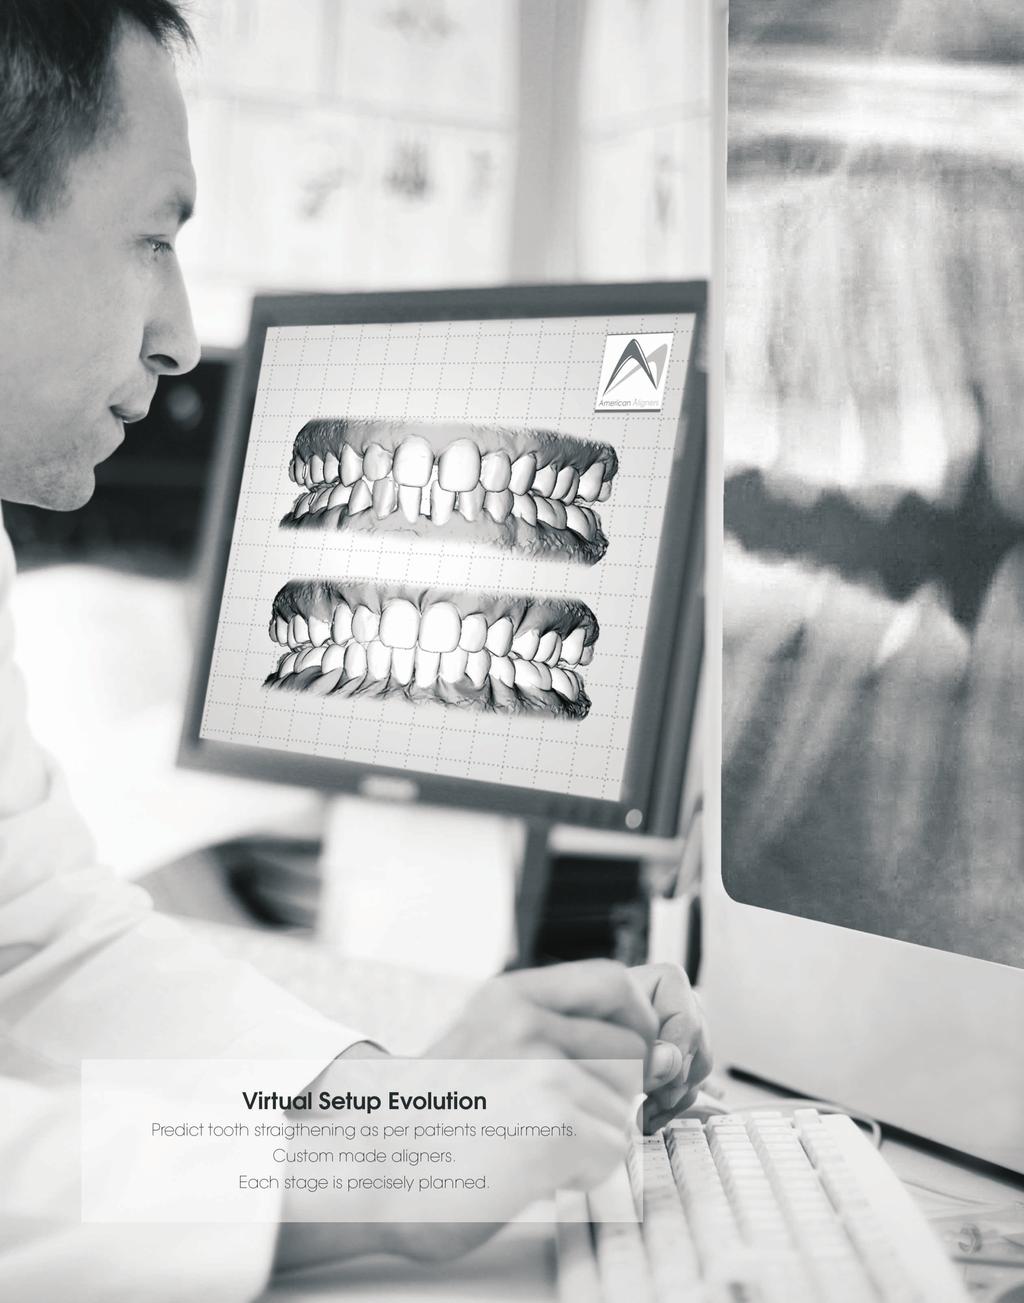 Virtual Setup Evolution Predict tooth straightening as per patients